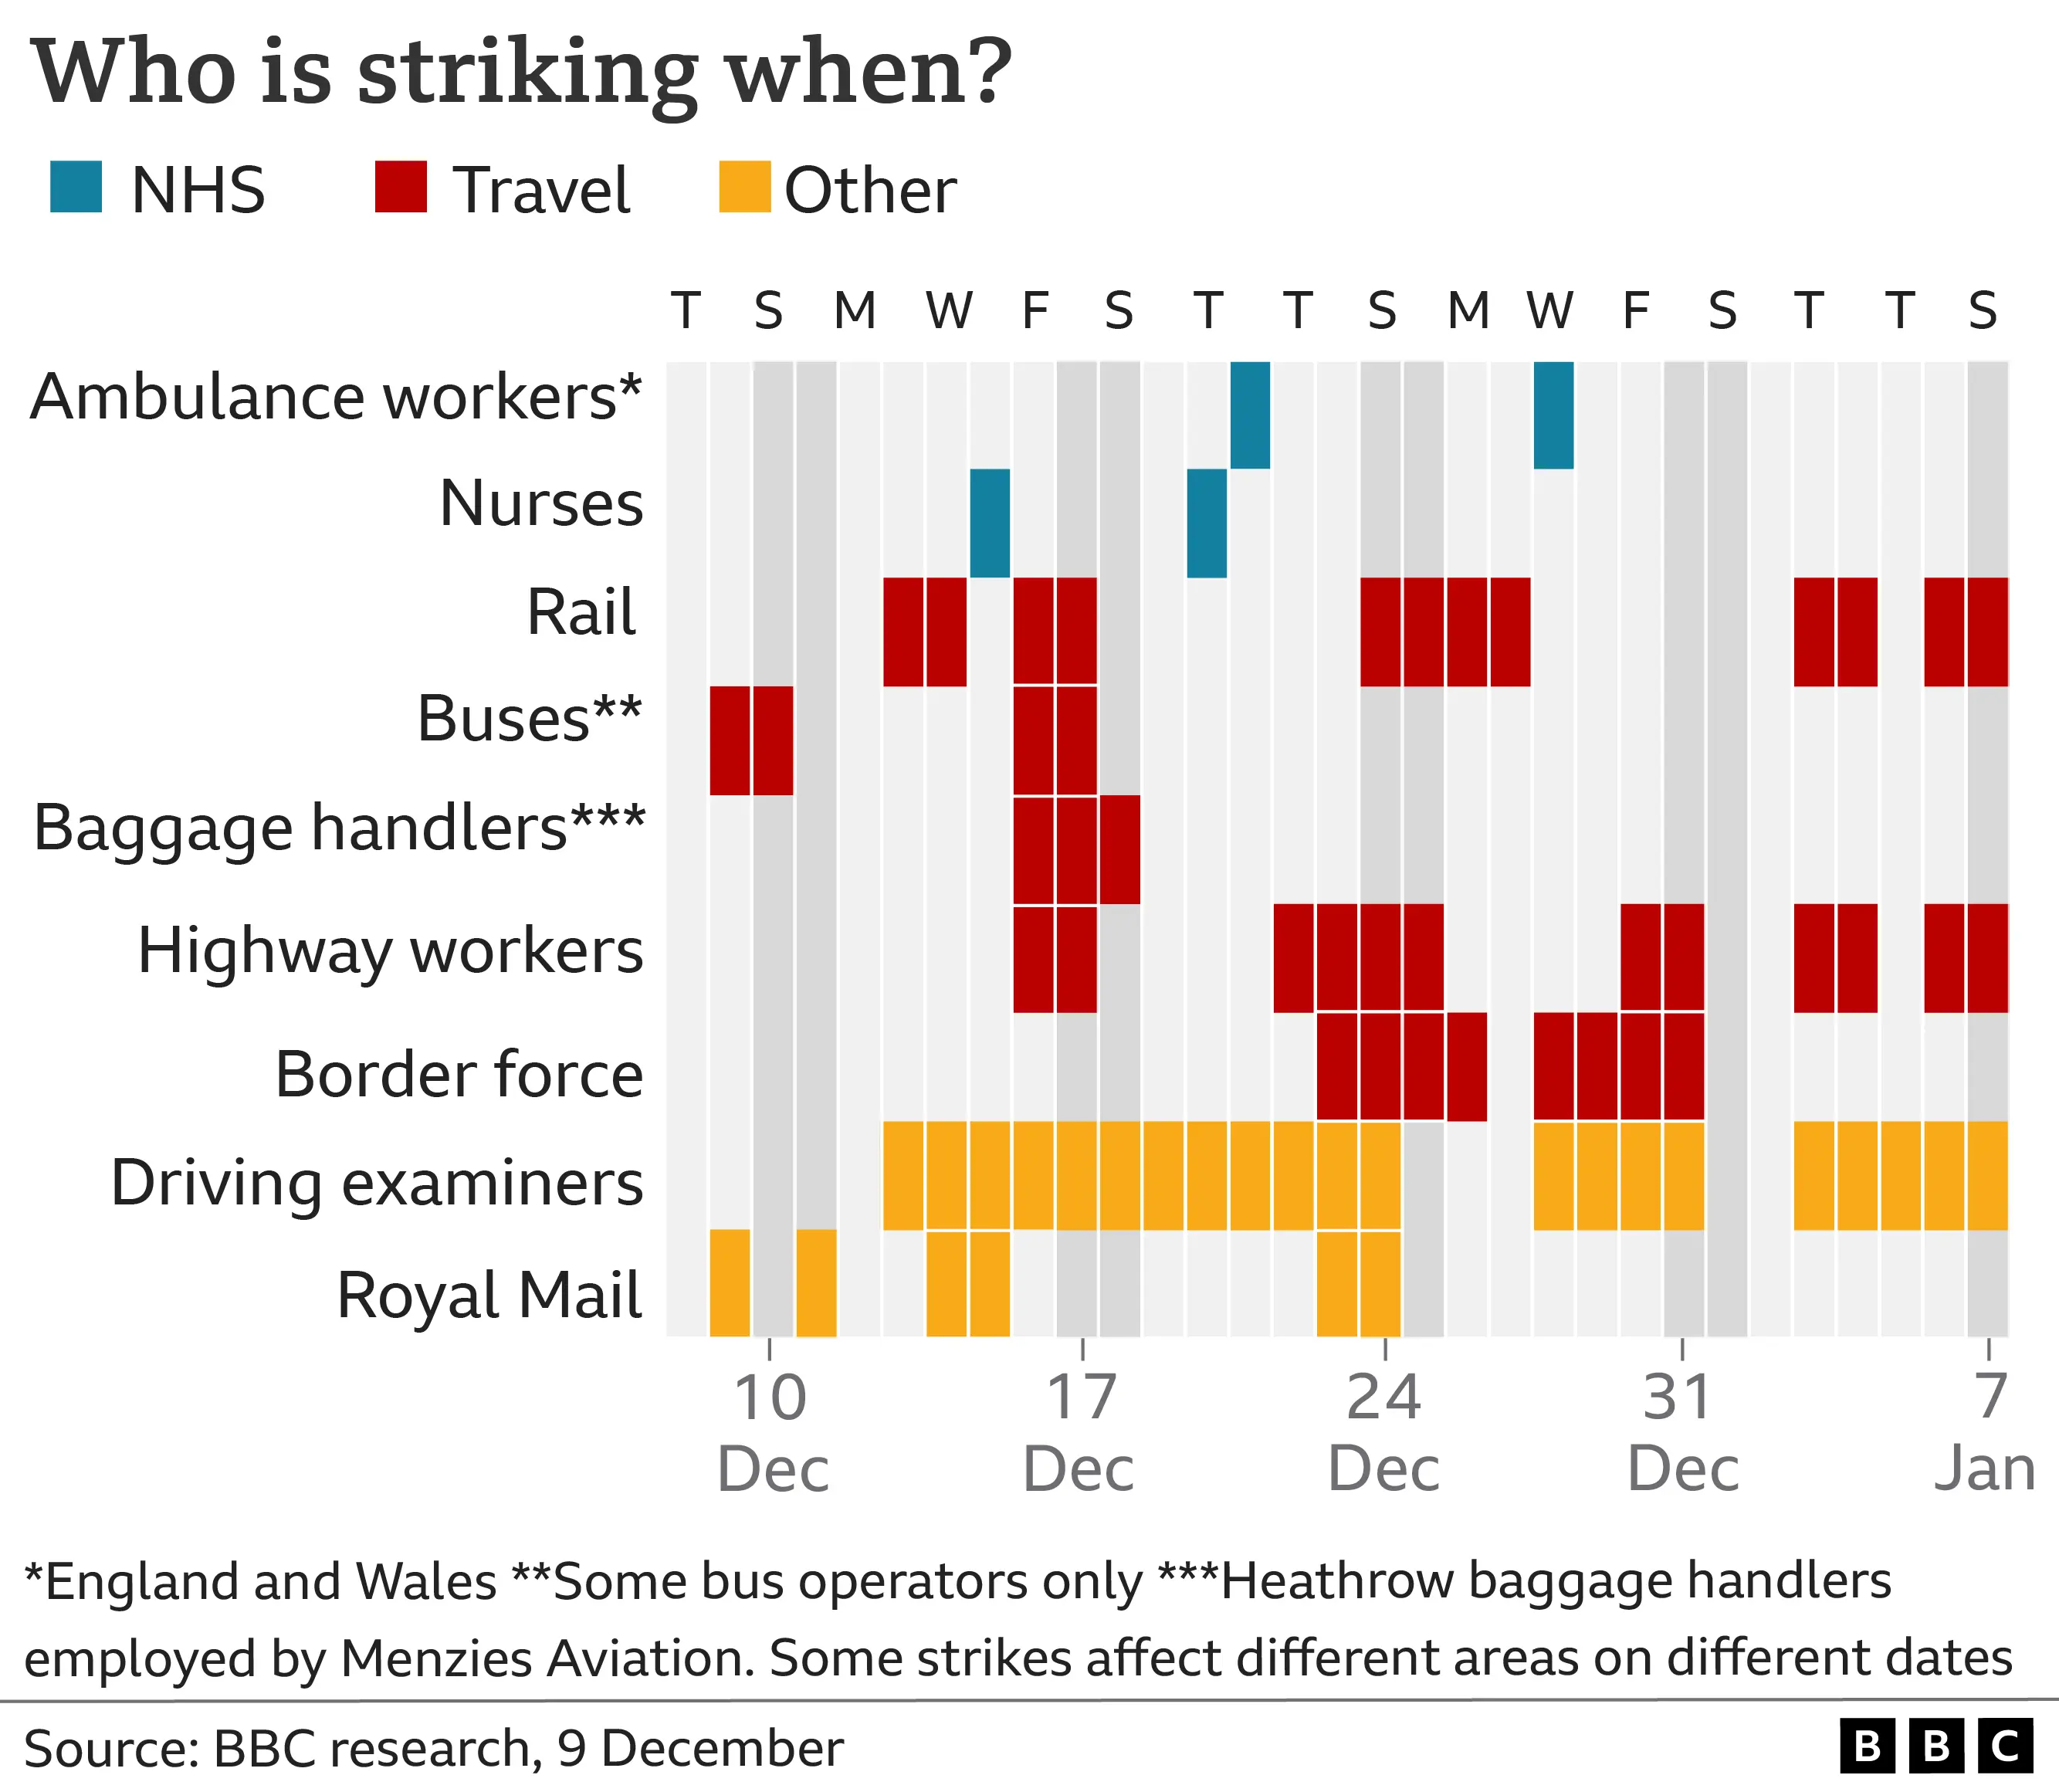 Who is striking and when?